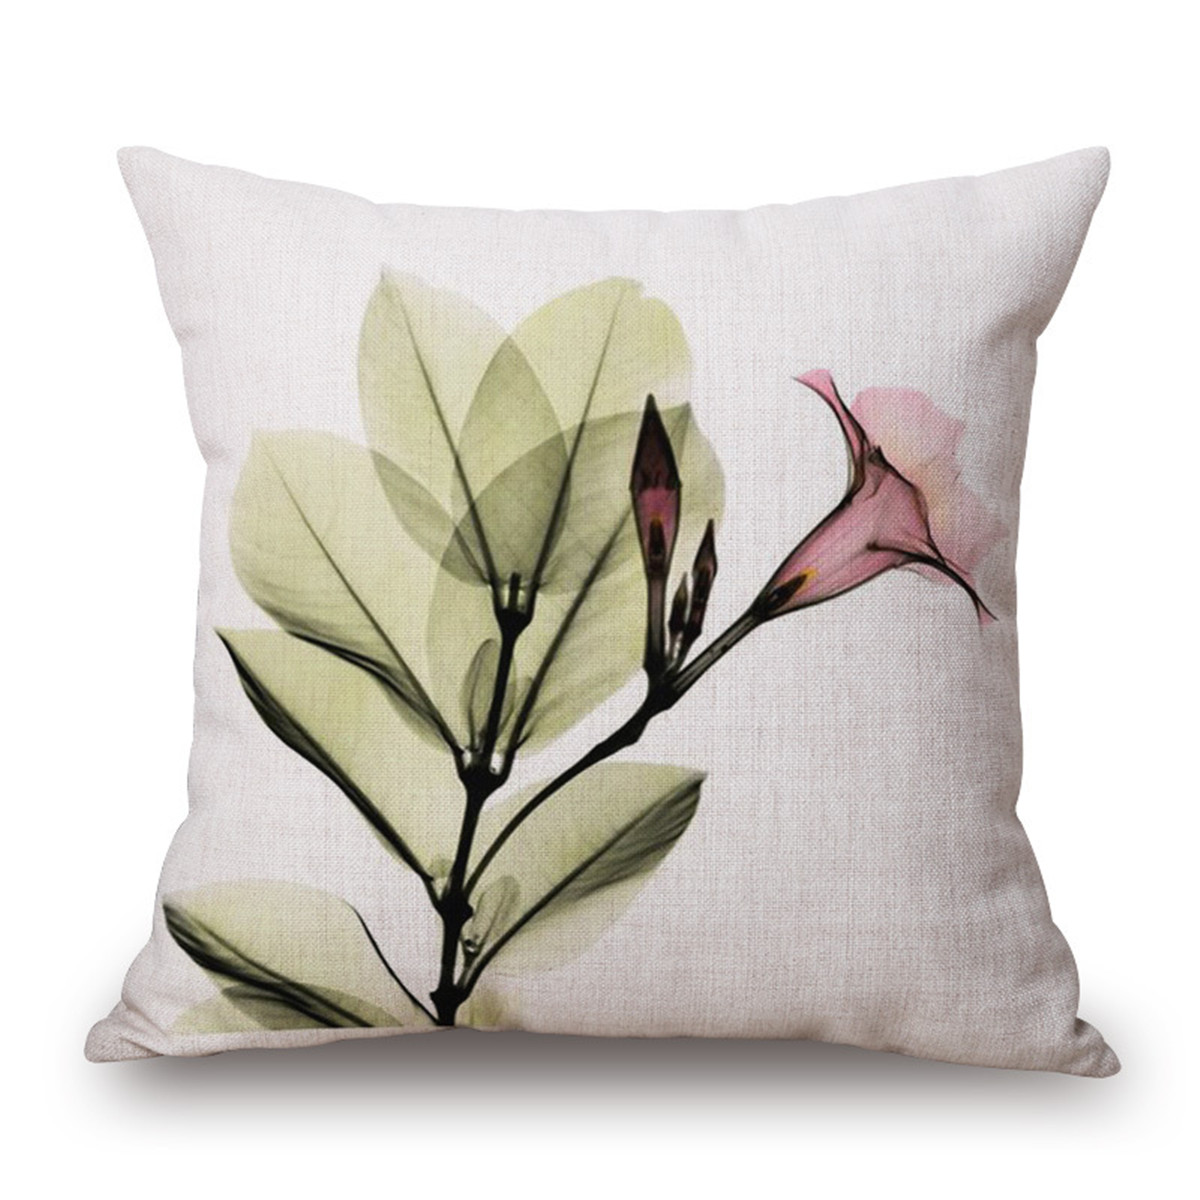 Ink-Painting-Flowers-Cotton-Linen-Pillow-Case-Tulips-Sofa-Cushion-Cover-45x45cm-1161674-6